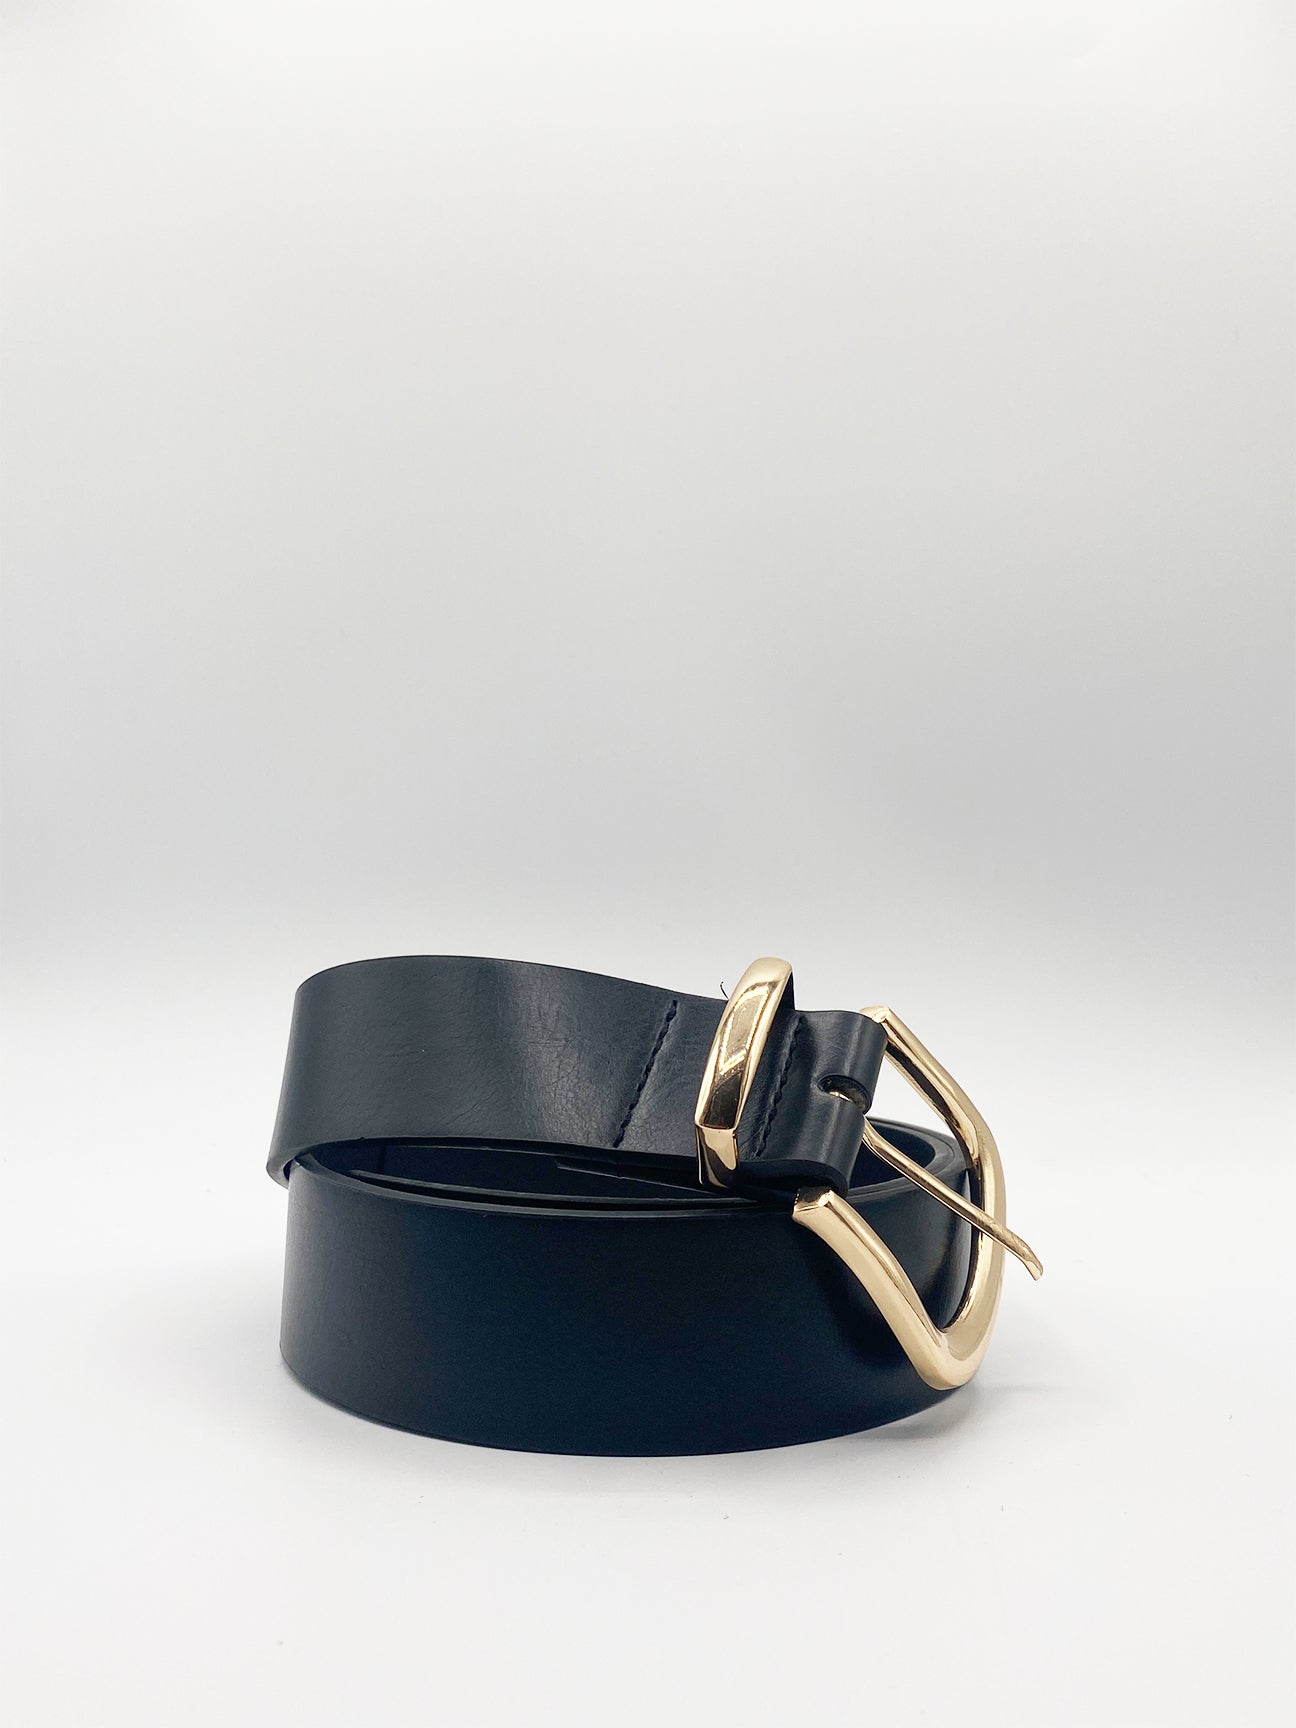 PU Leather Belt With Gold Metal Buckle